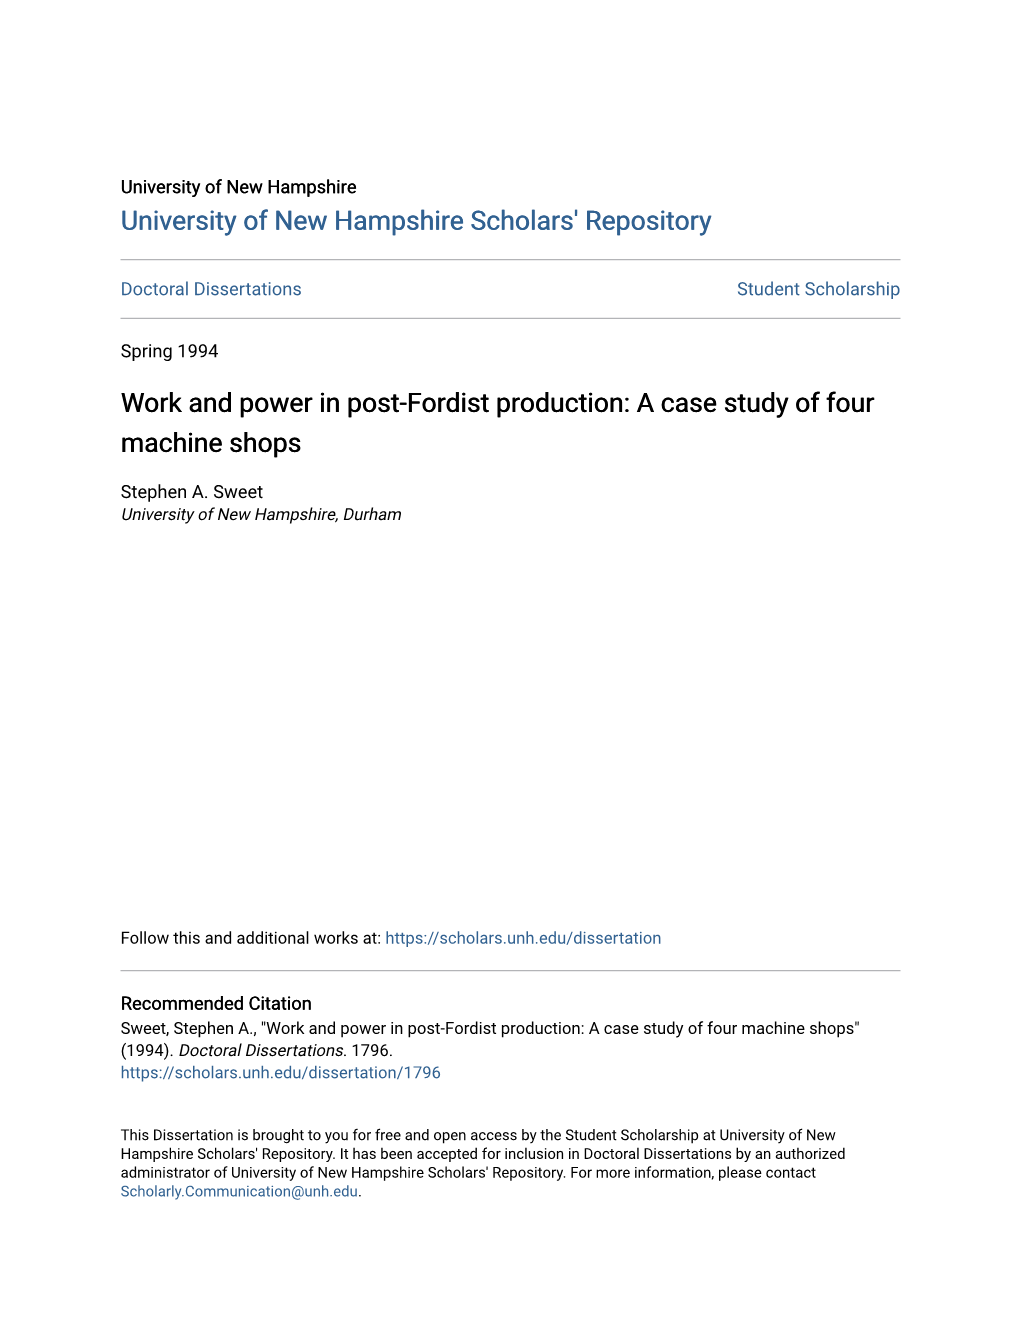 Work and Power in Post-Fordist Production: a Case Study of Four Machine Shops